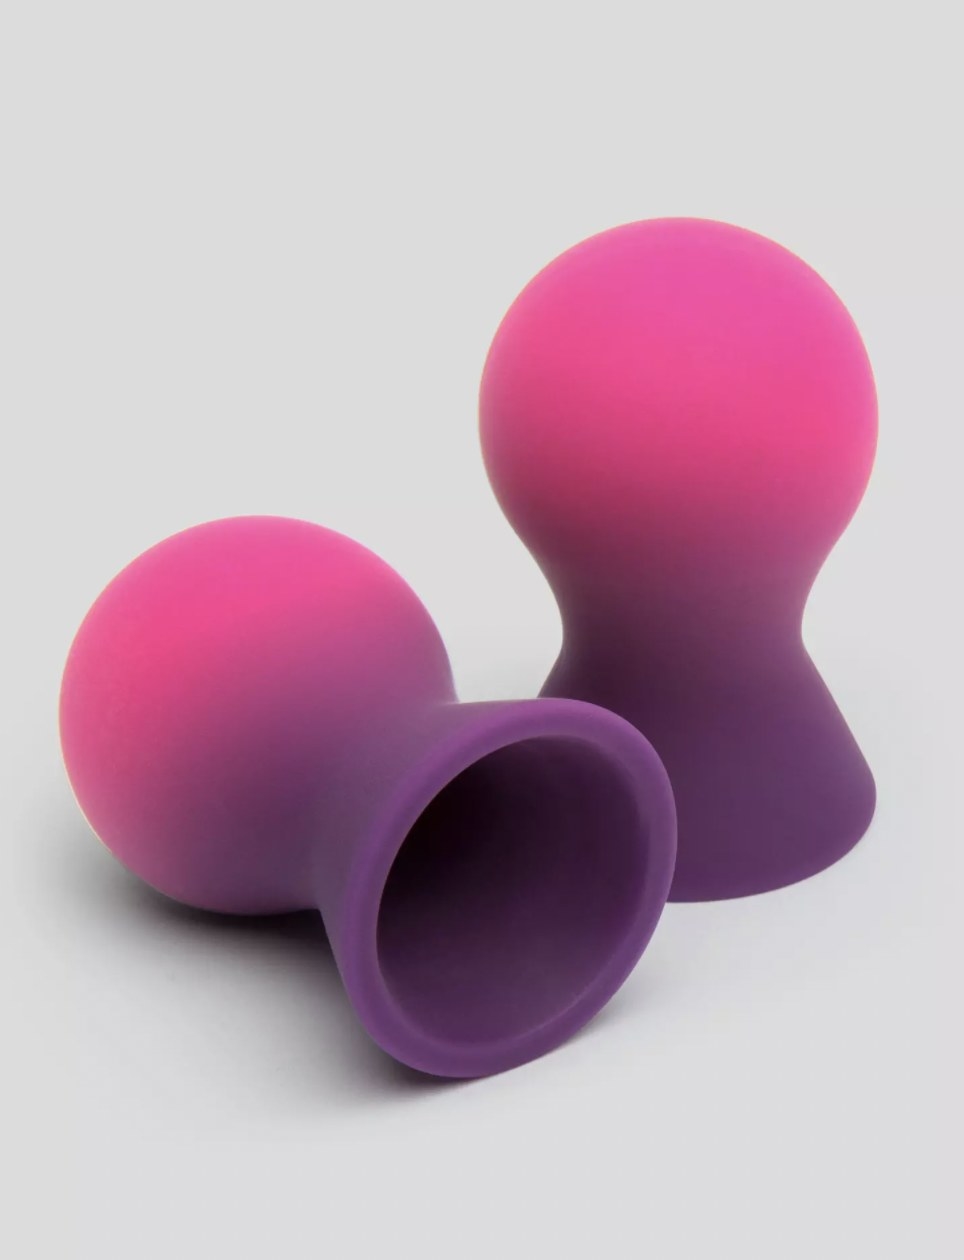 The purple and pink silicone nipple suckers with spherical shape